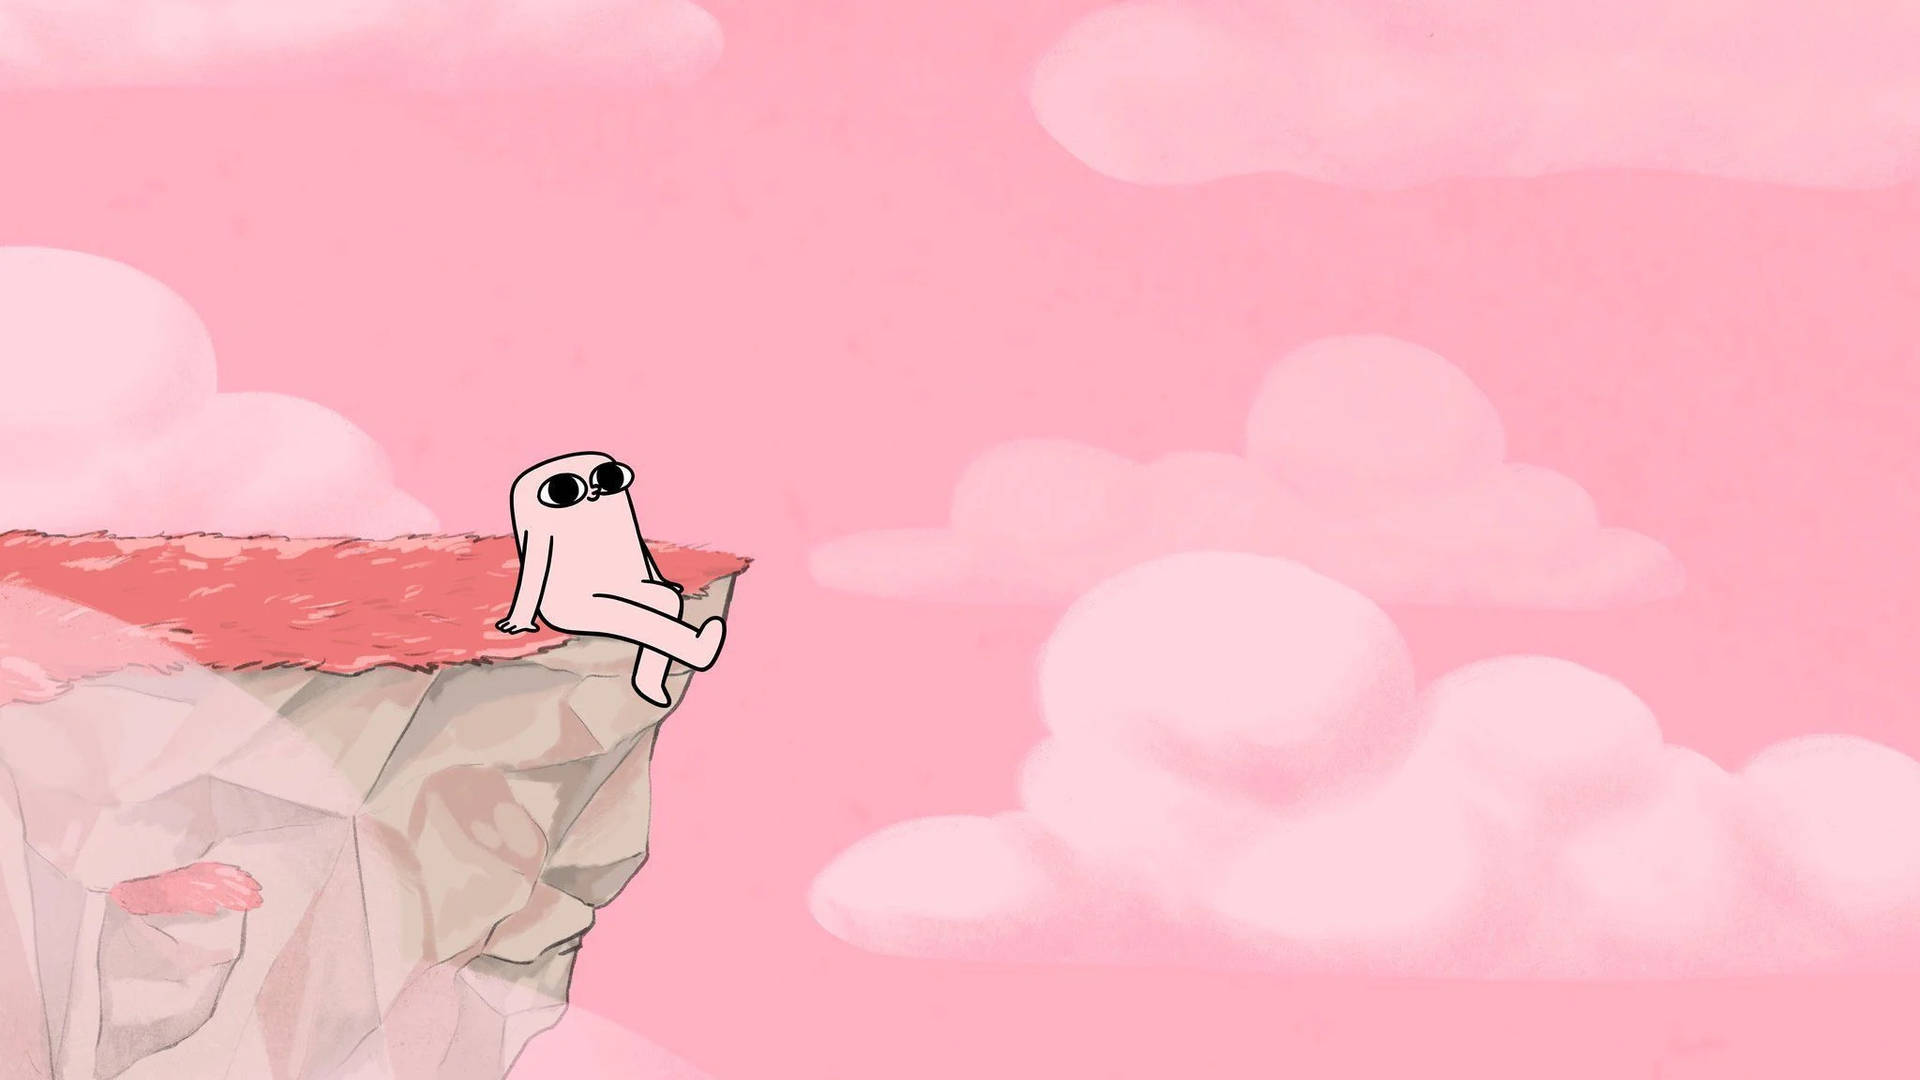 Aesthetic Cartoon Ketnipz Character On Cliff Background